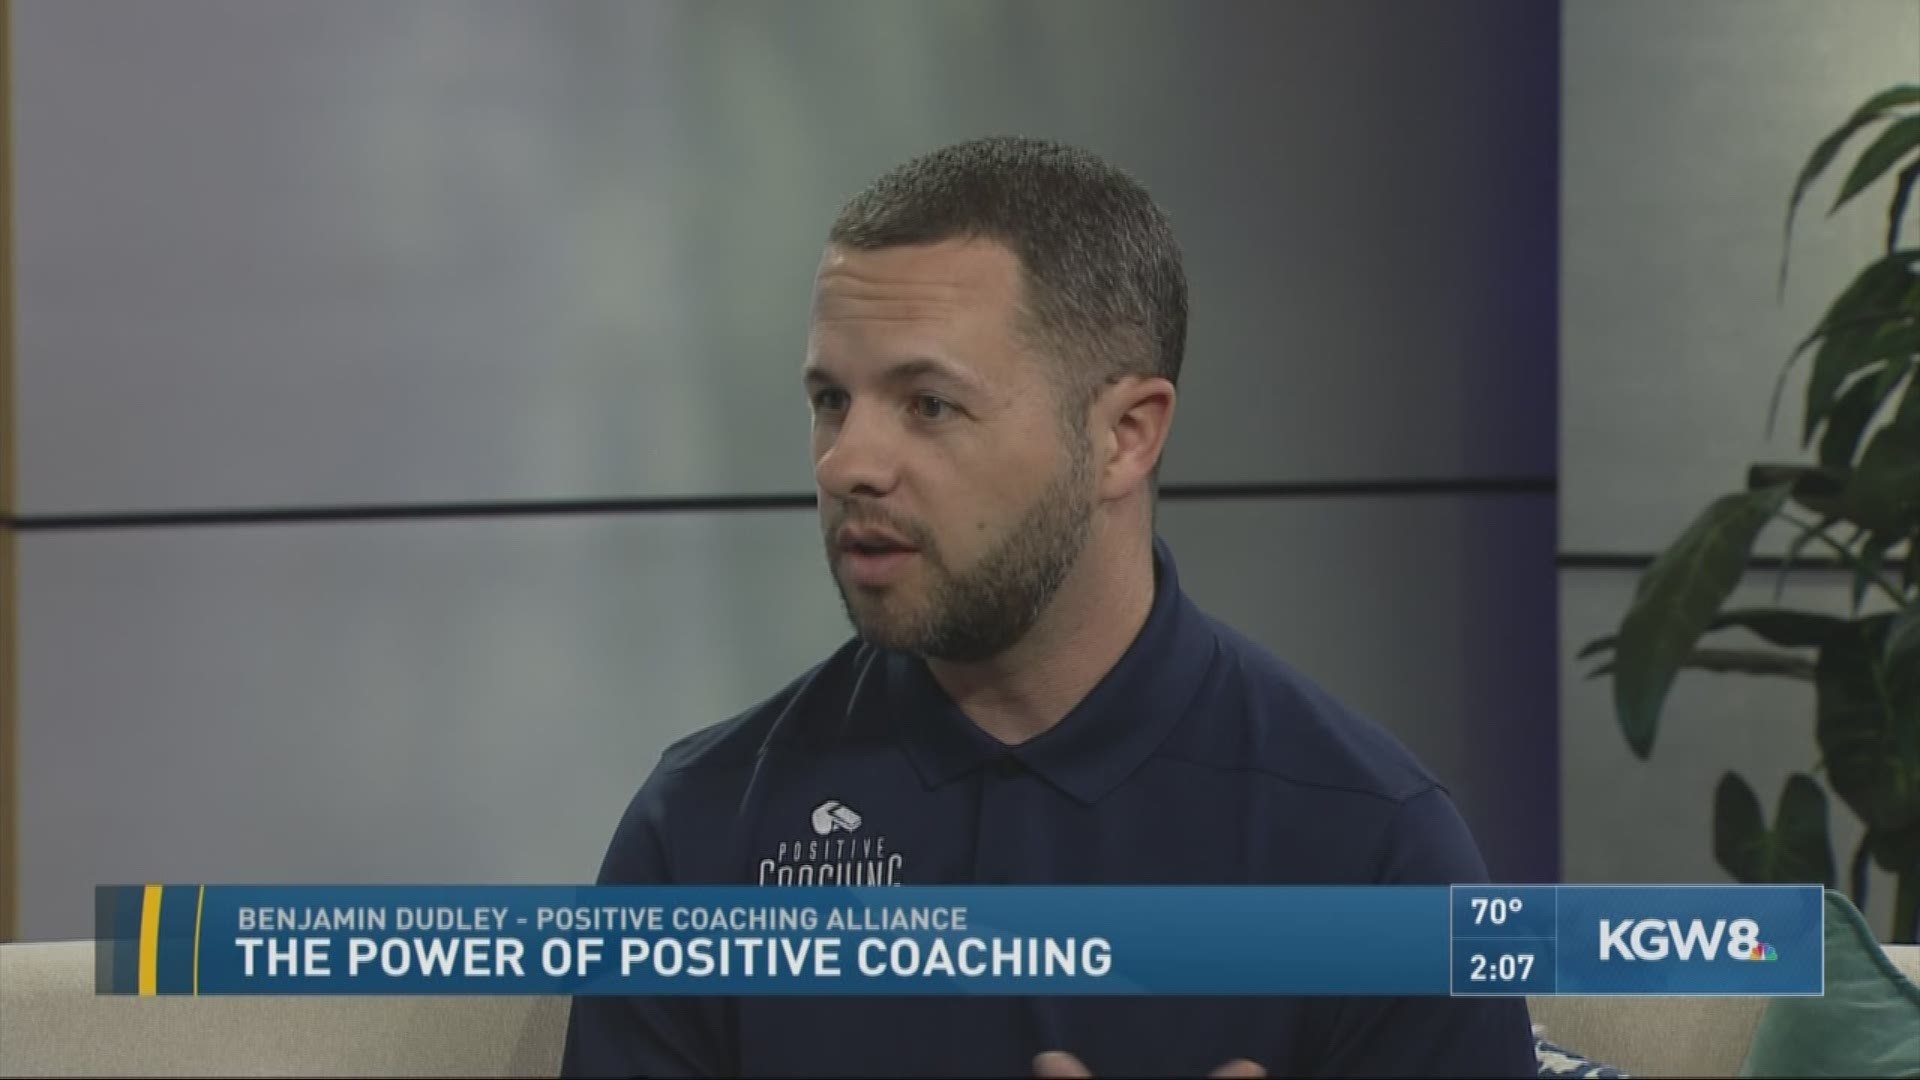 The power of positive coaching